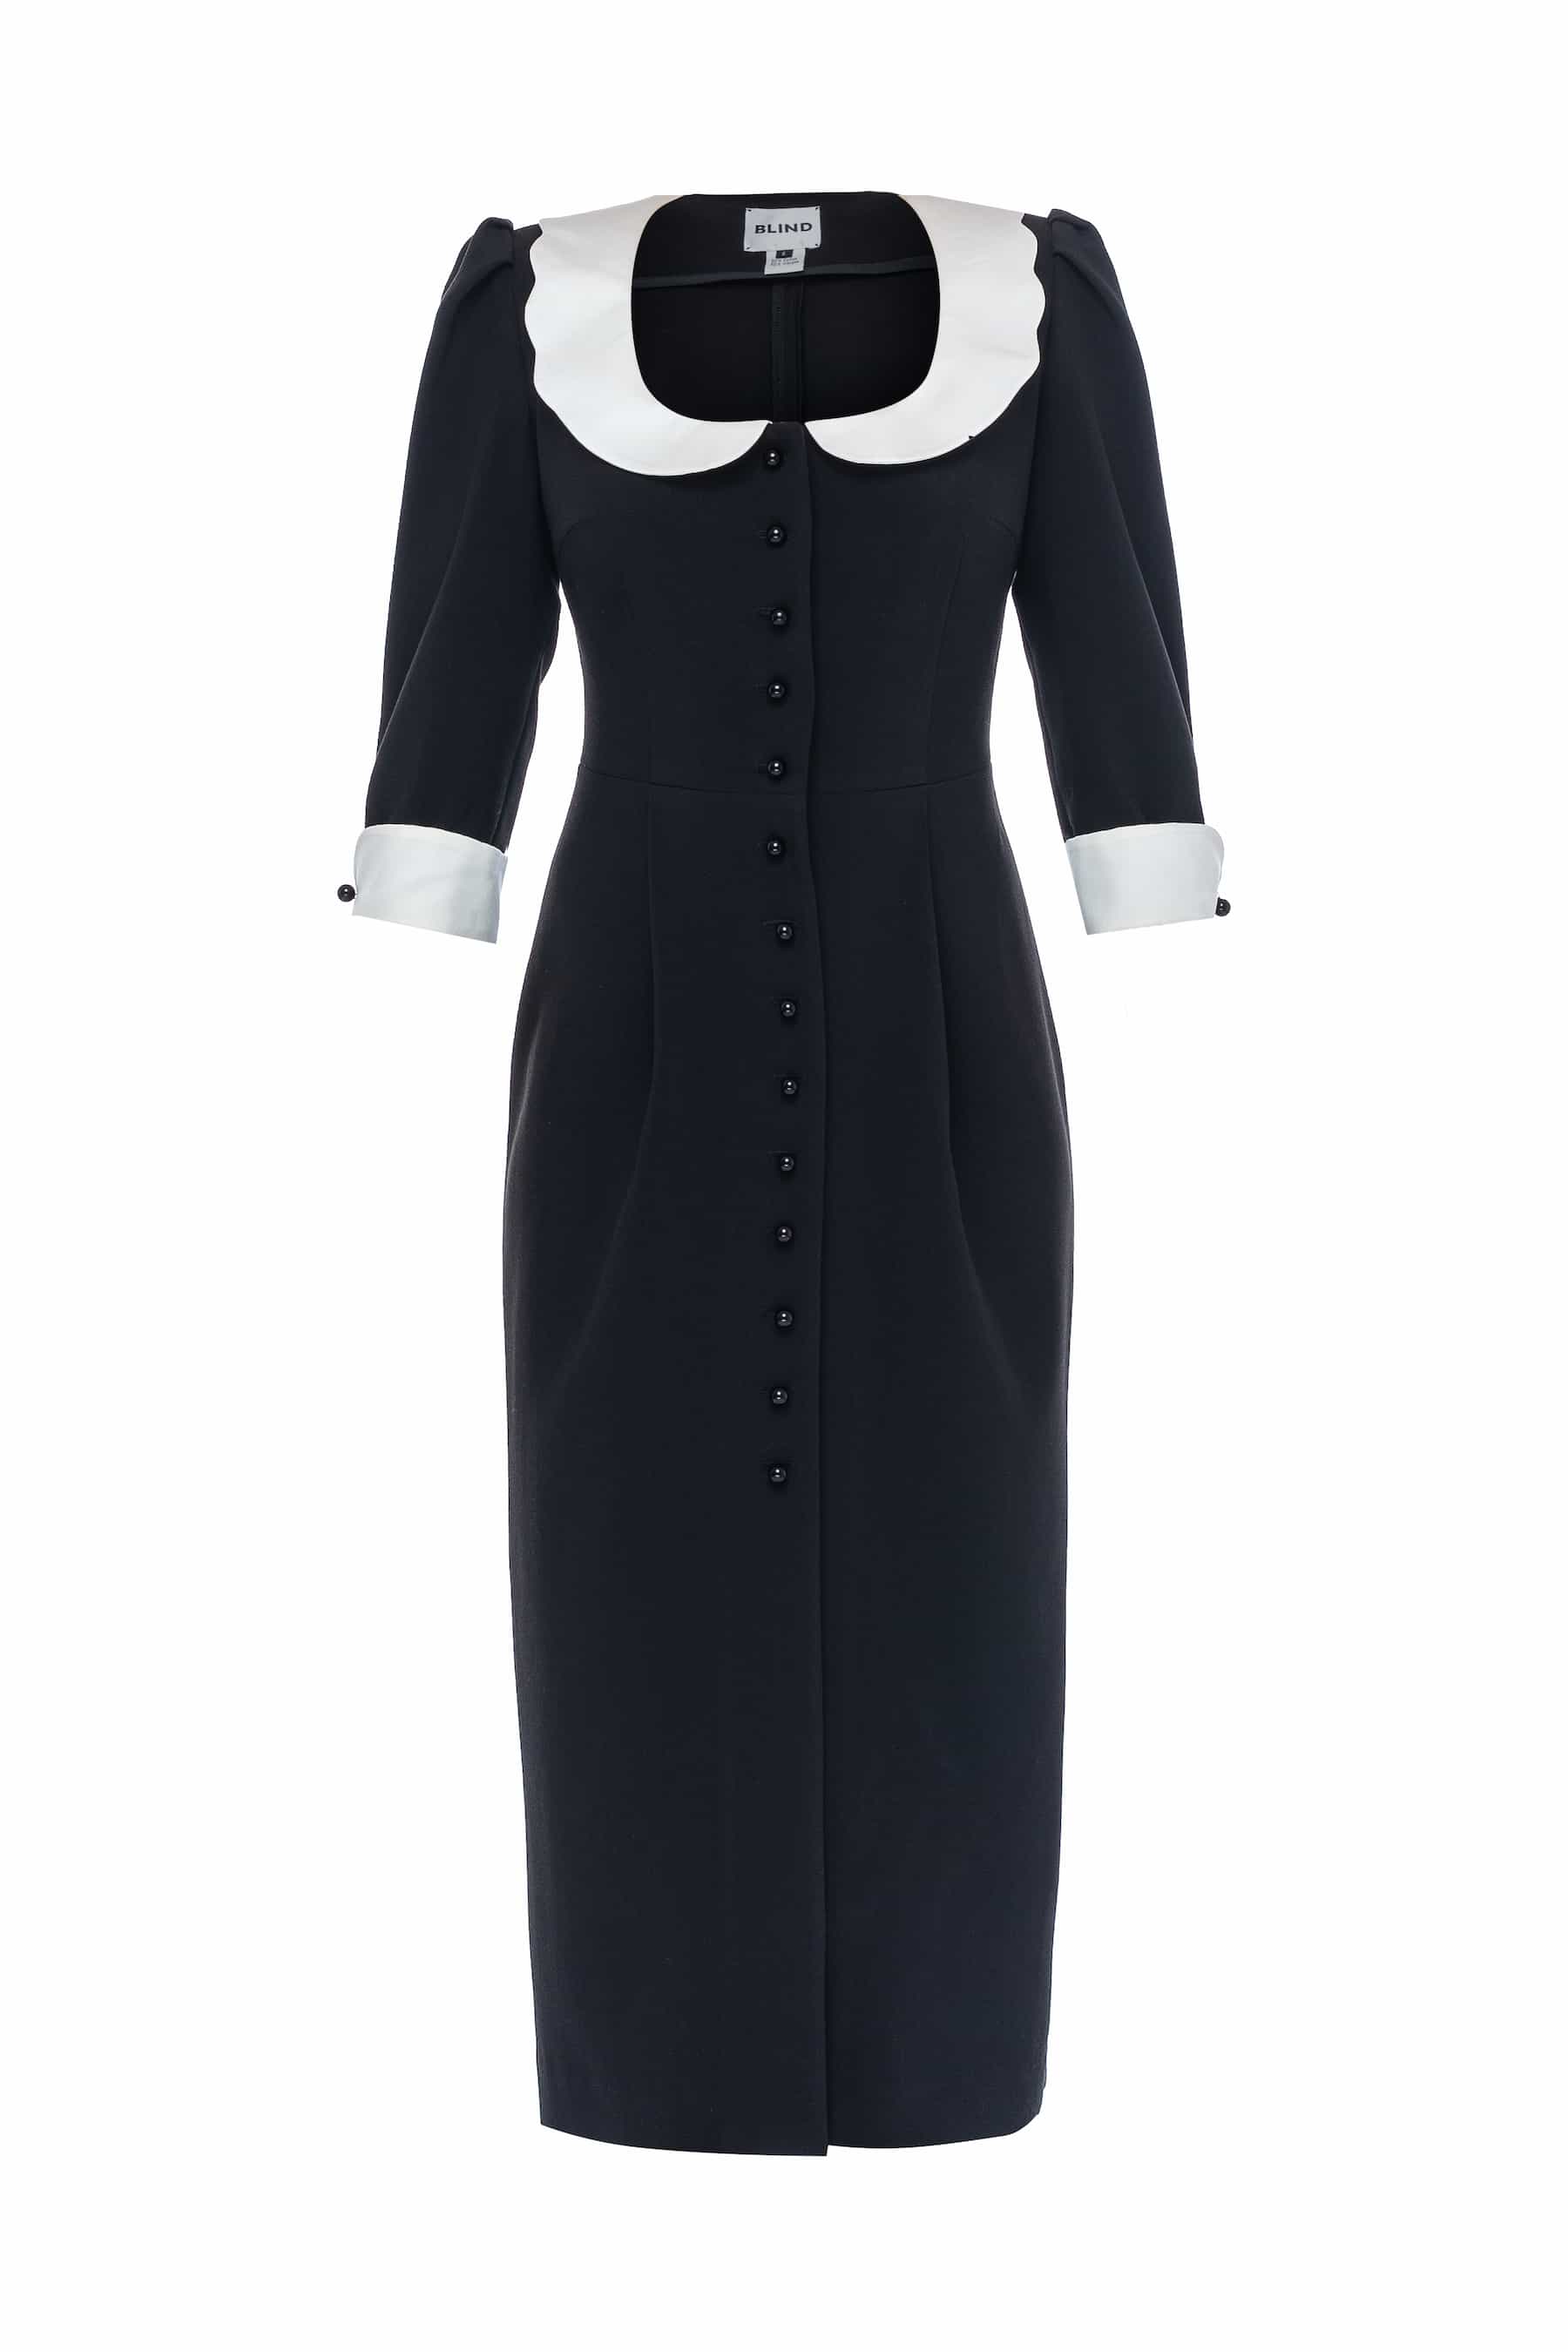 Black sheath dress with white collar and cuffs